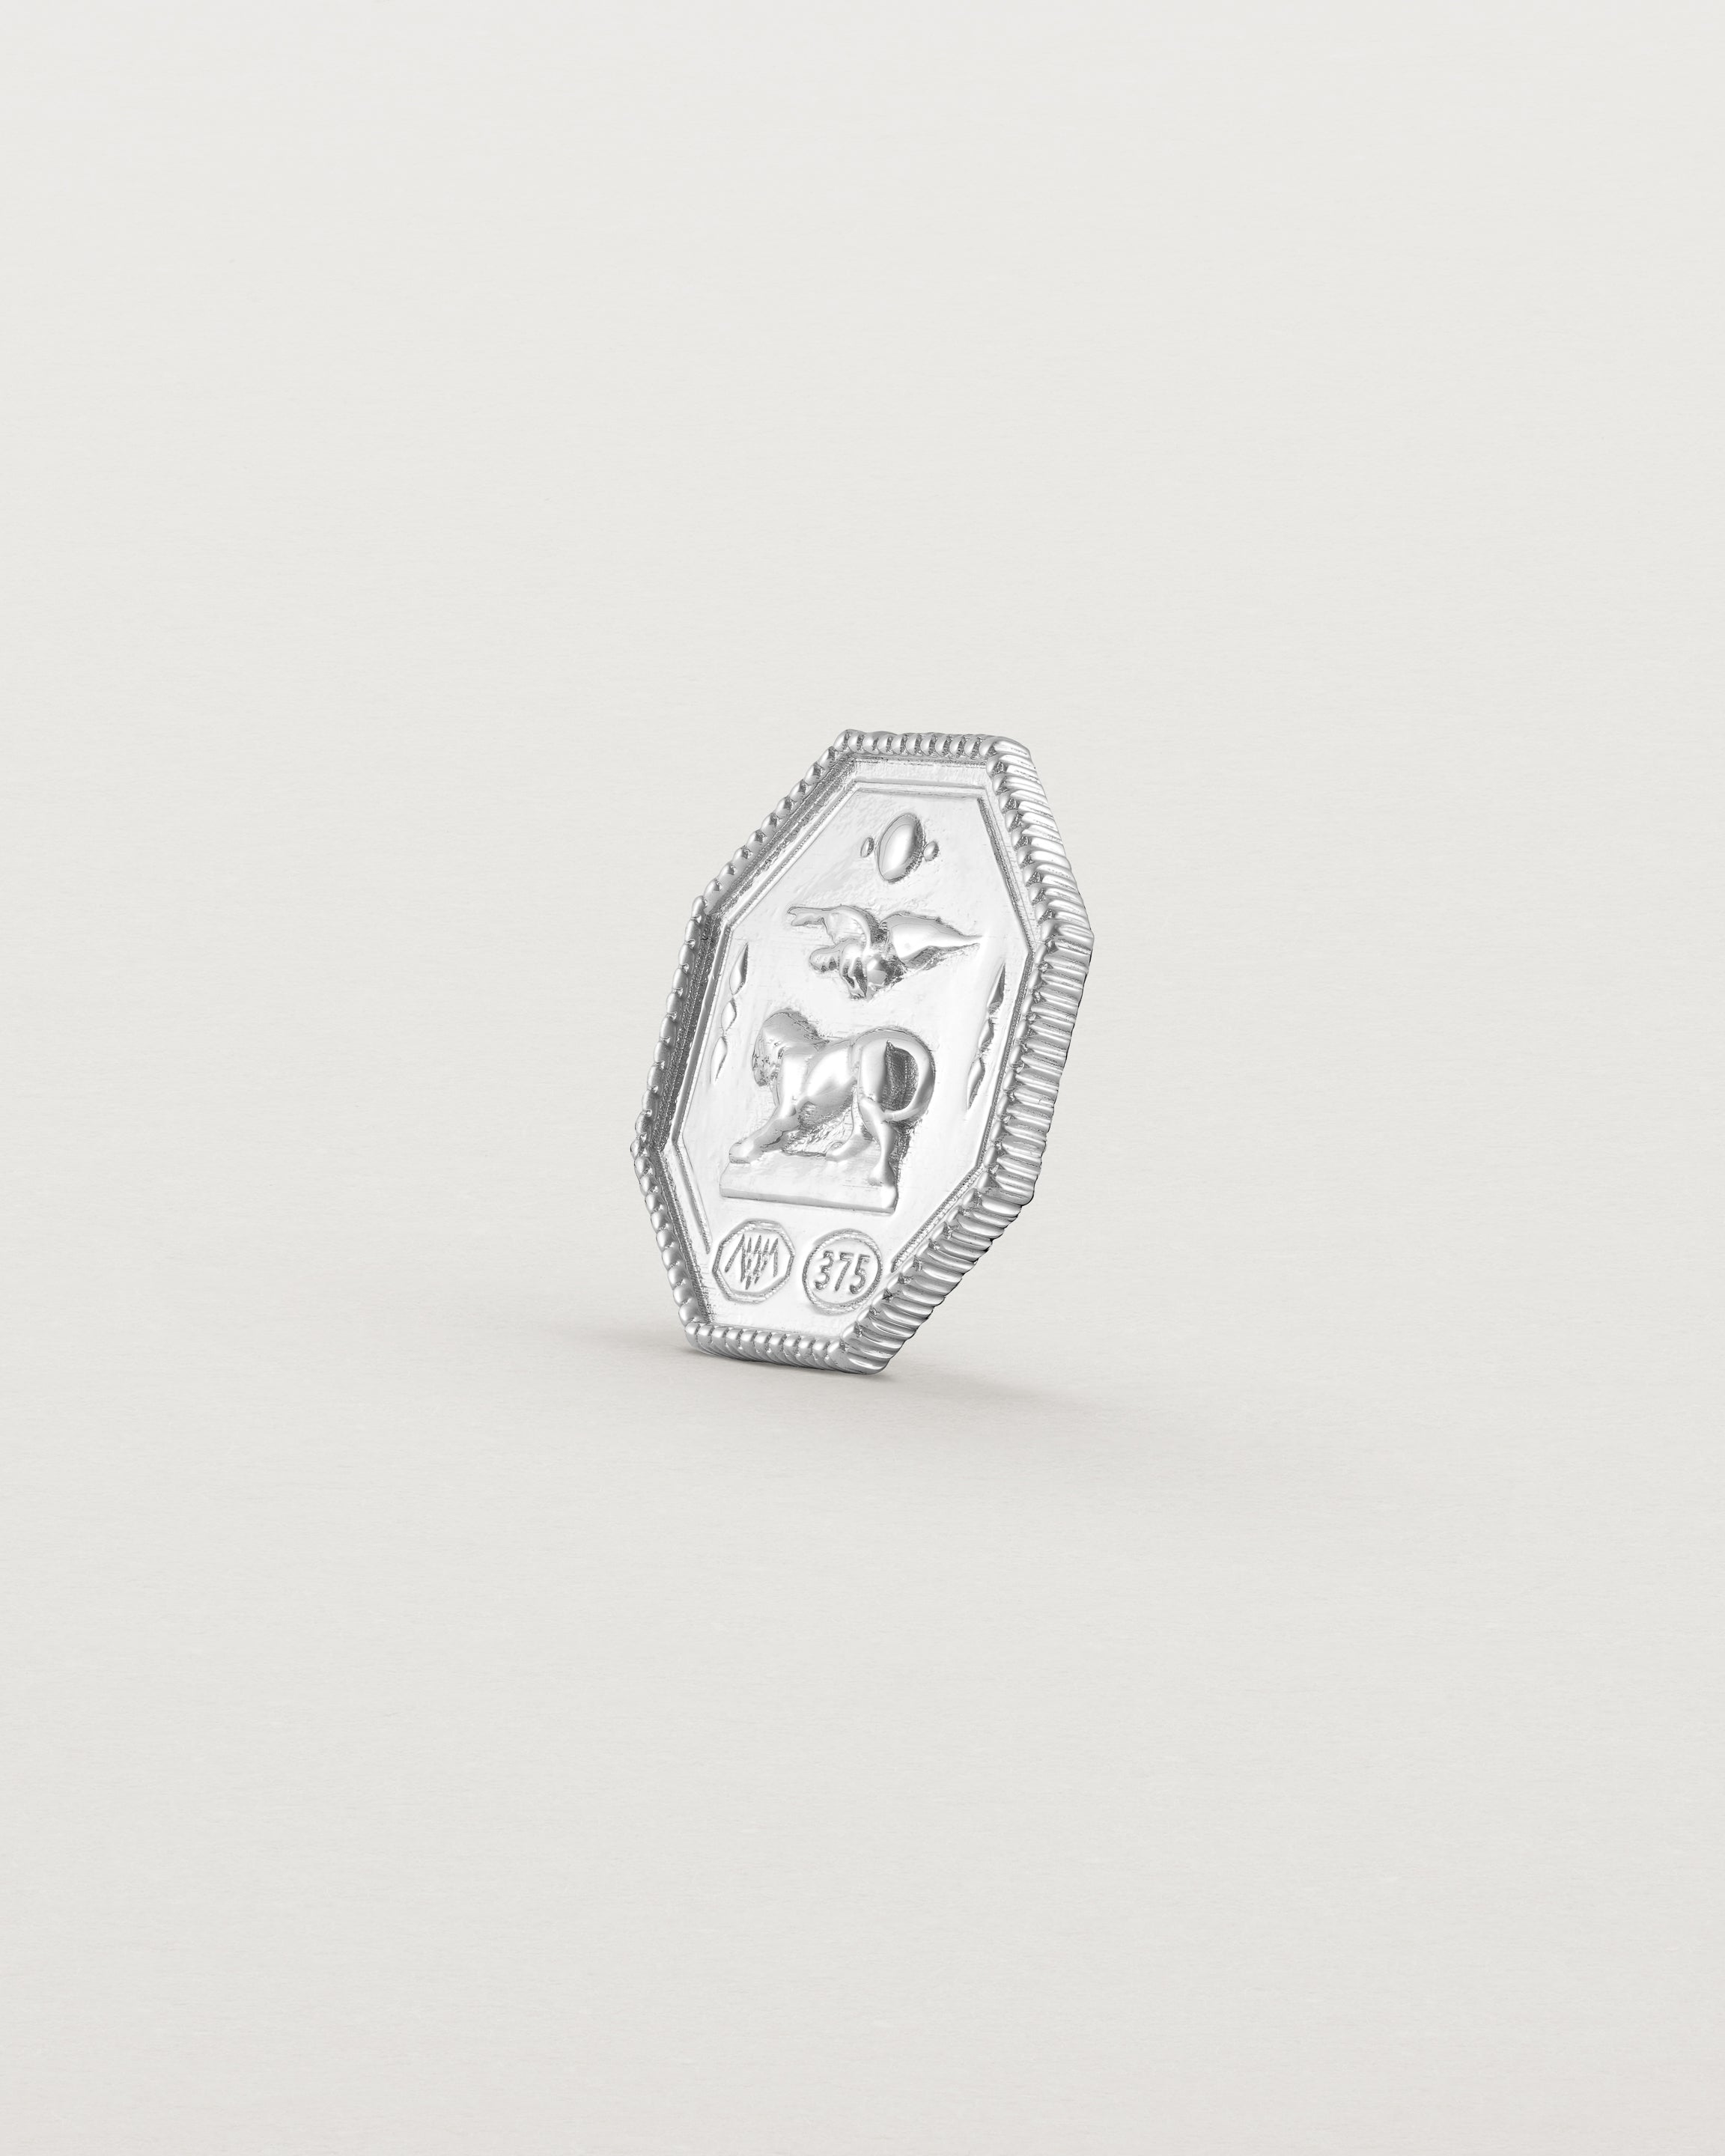 Side angle of the Sterling silver six pence coin.